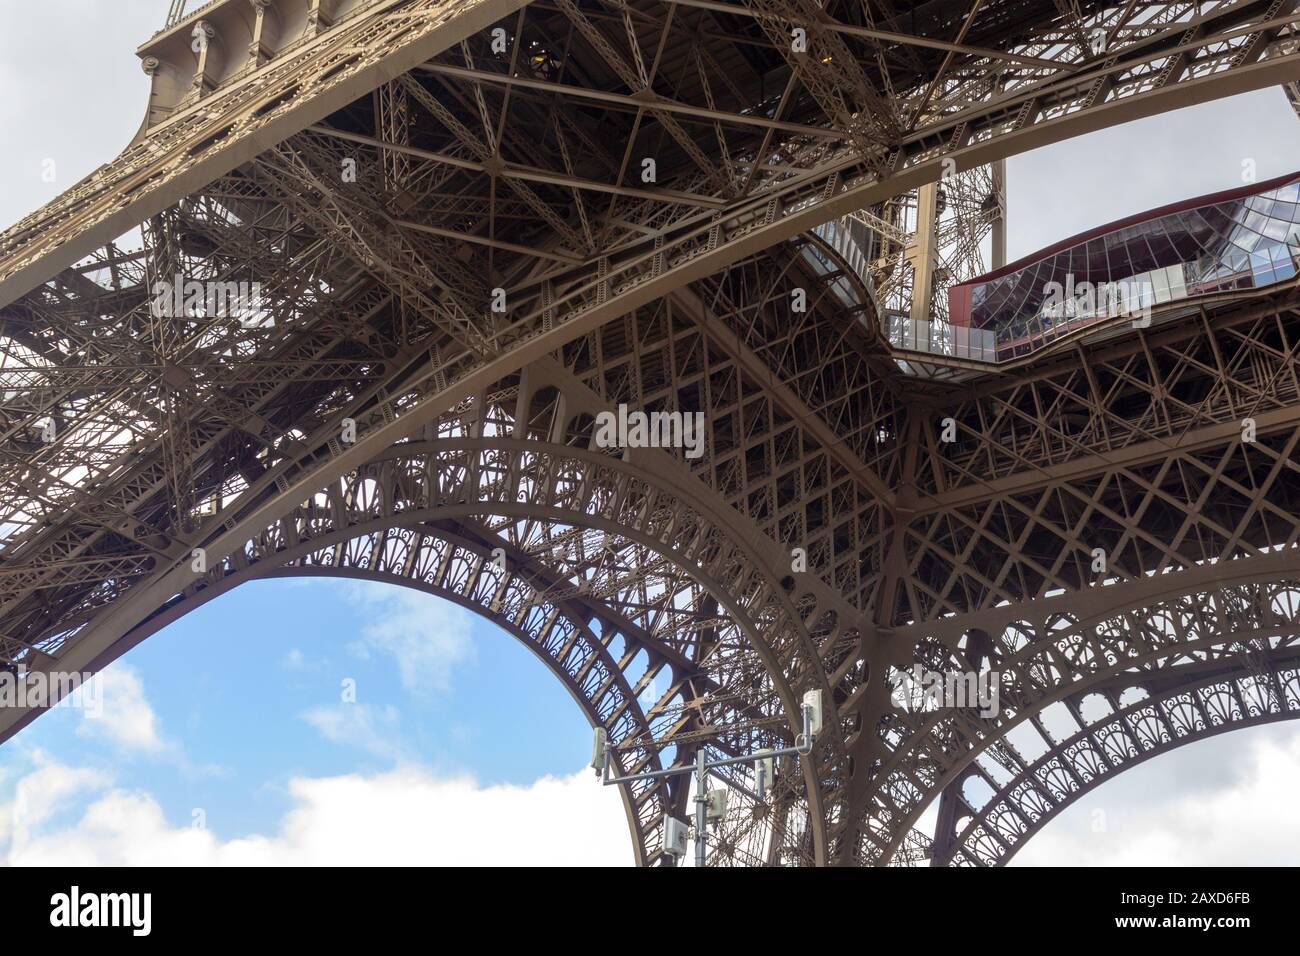 Underneath of the Eiffel Tower Stock Photo